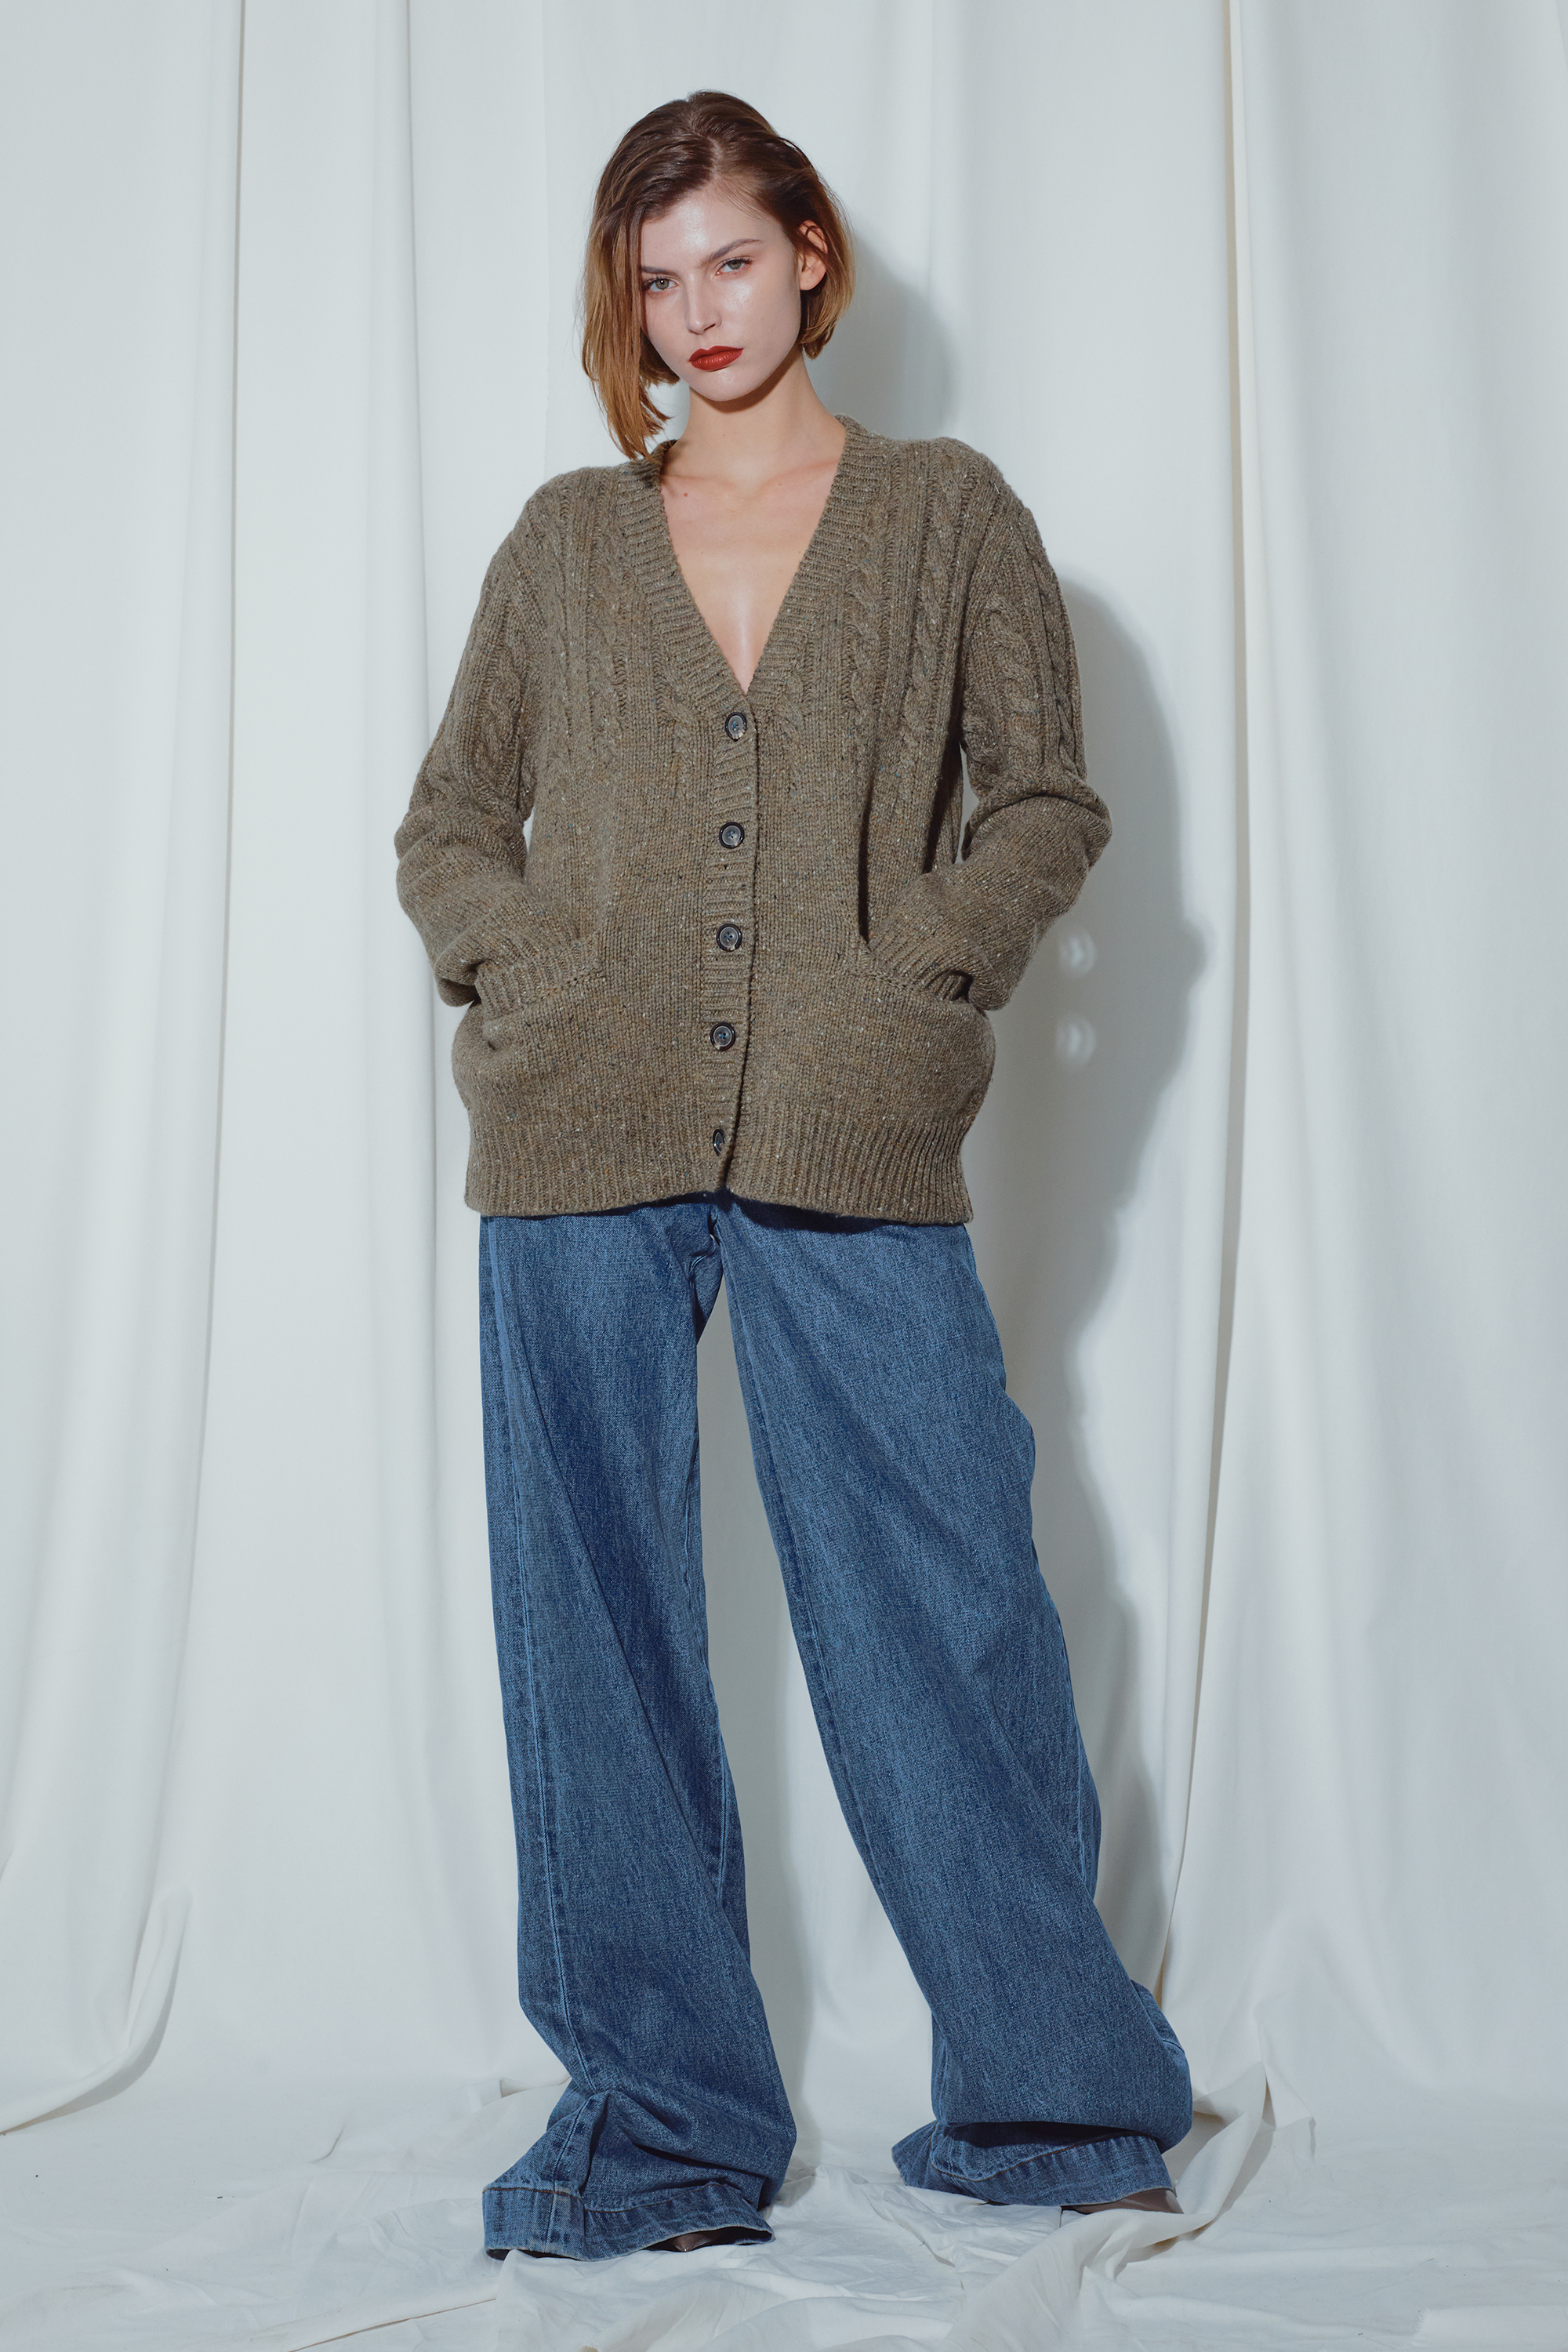 OLIVE GREEN GRADIENT TWISTED KNIT CARDIGAN